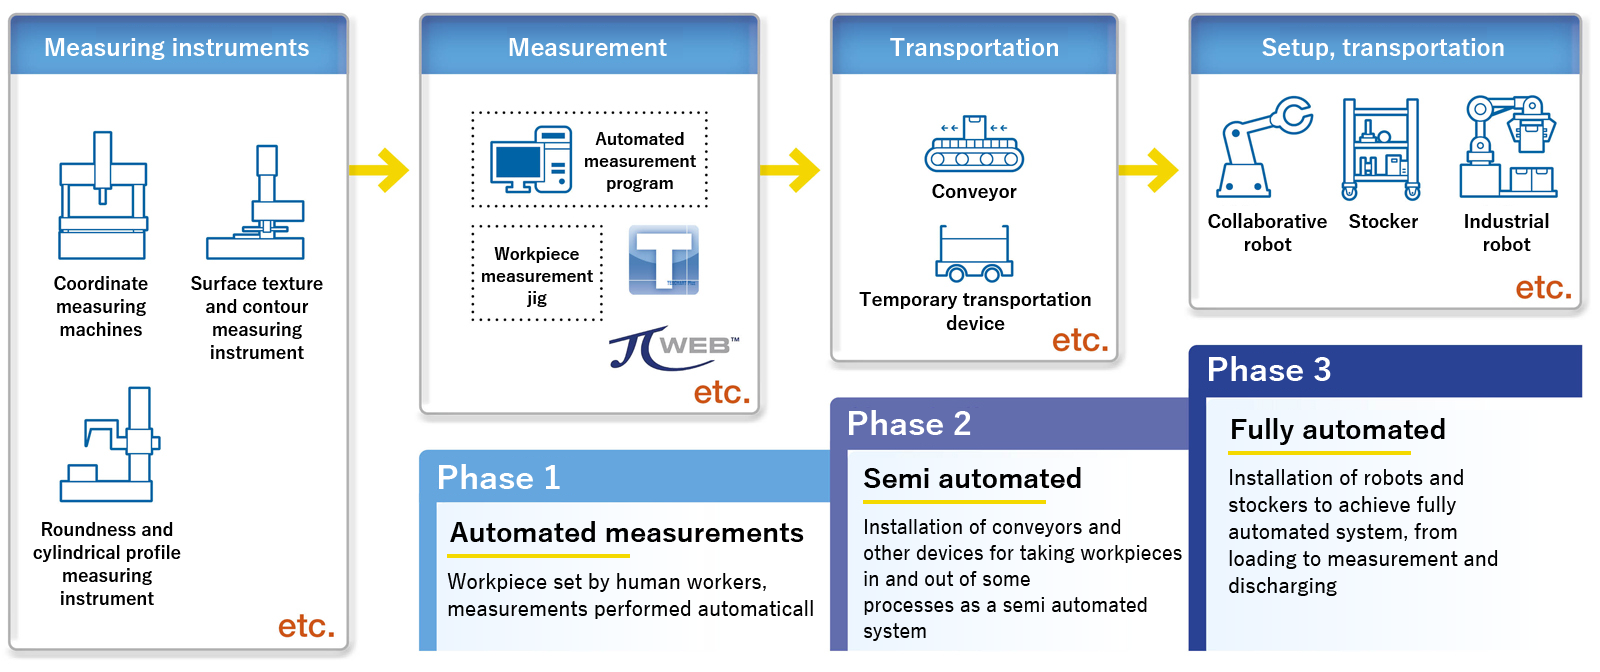 Automation in phases